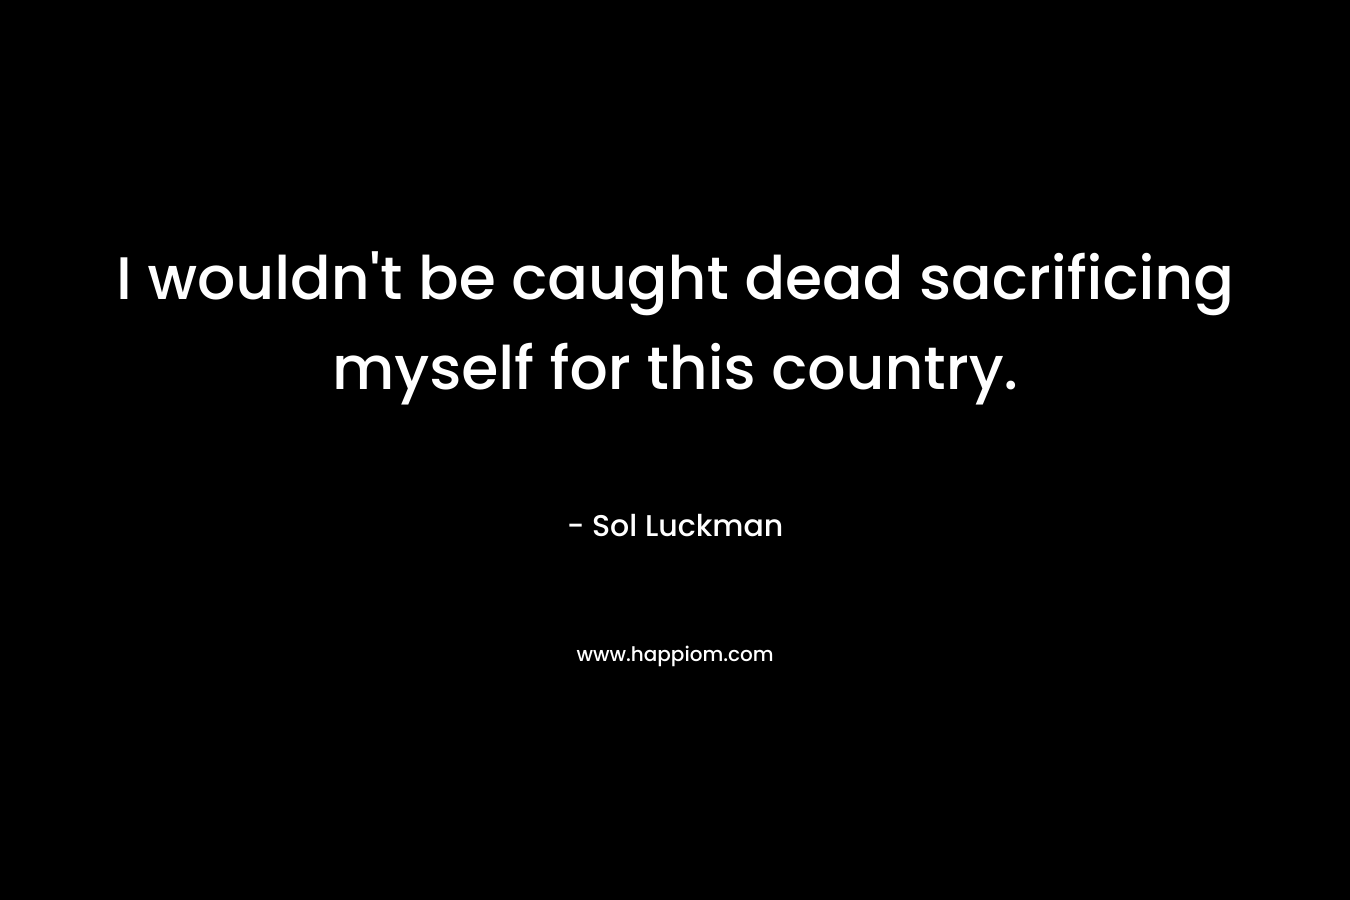 I wouldn't be caught dead sacrificing myself for this country.